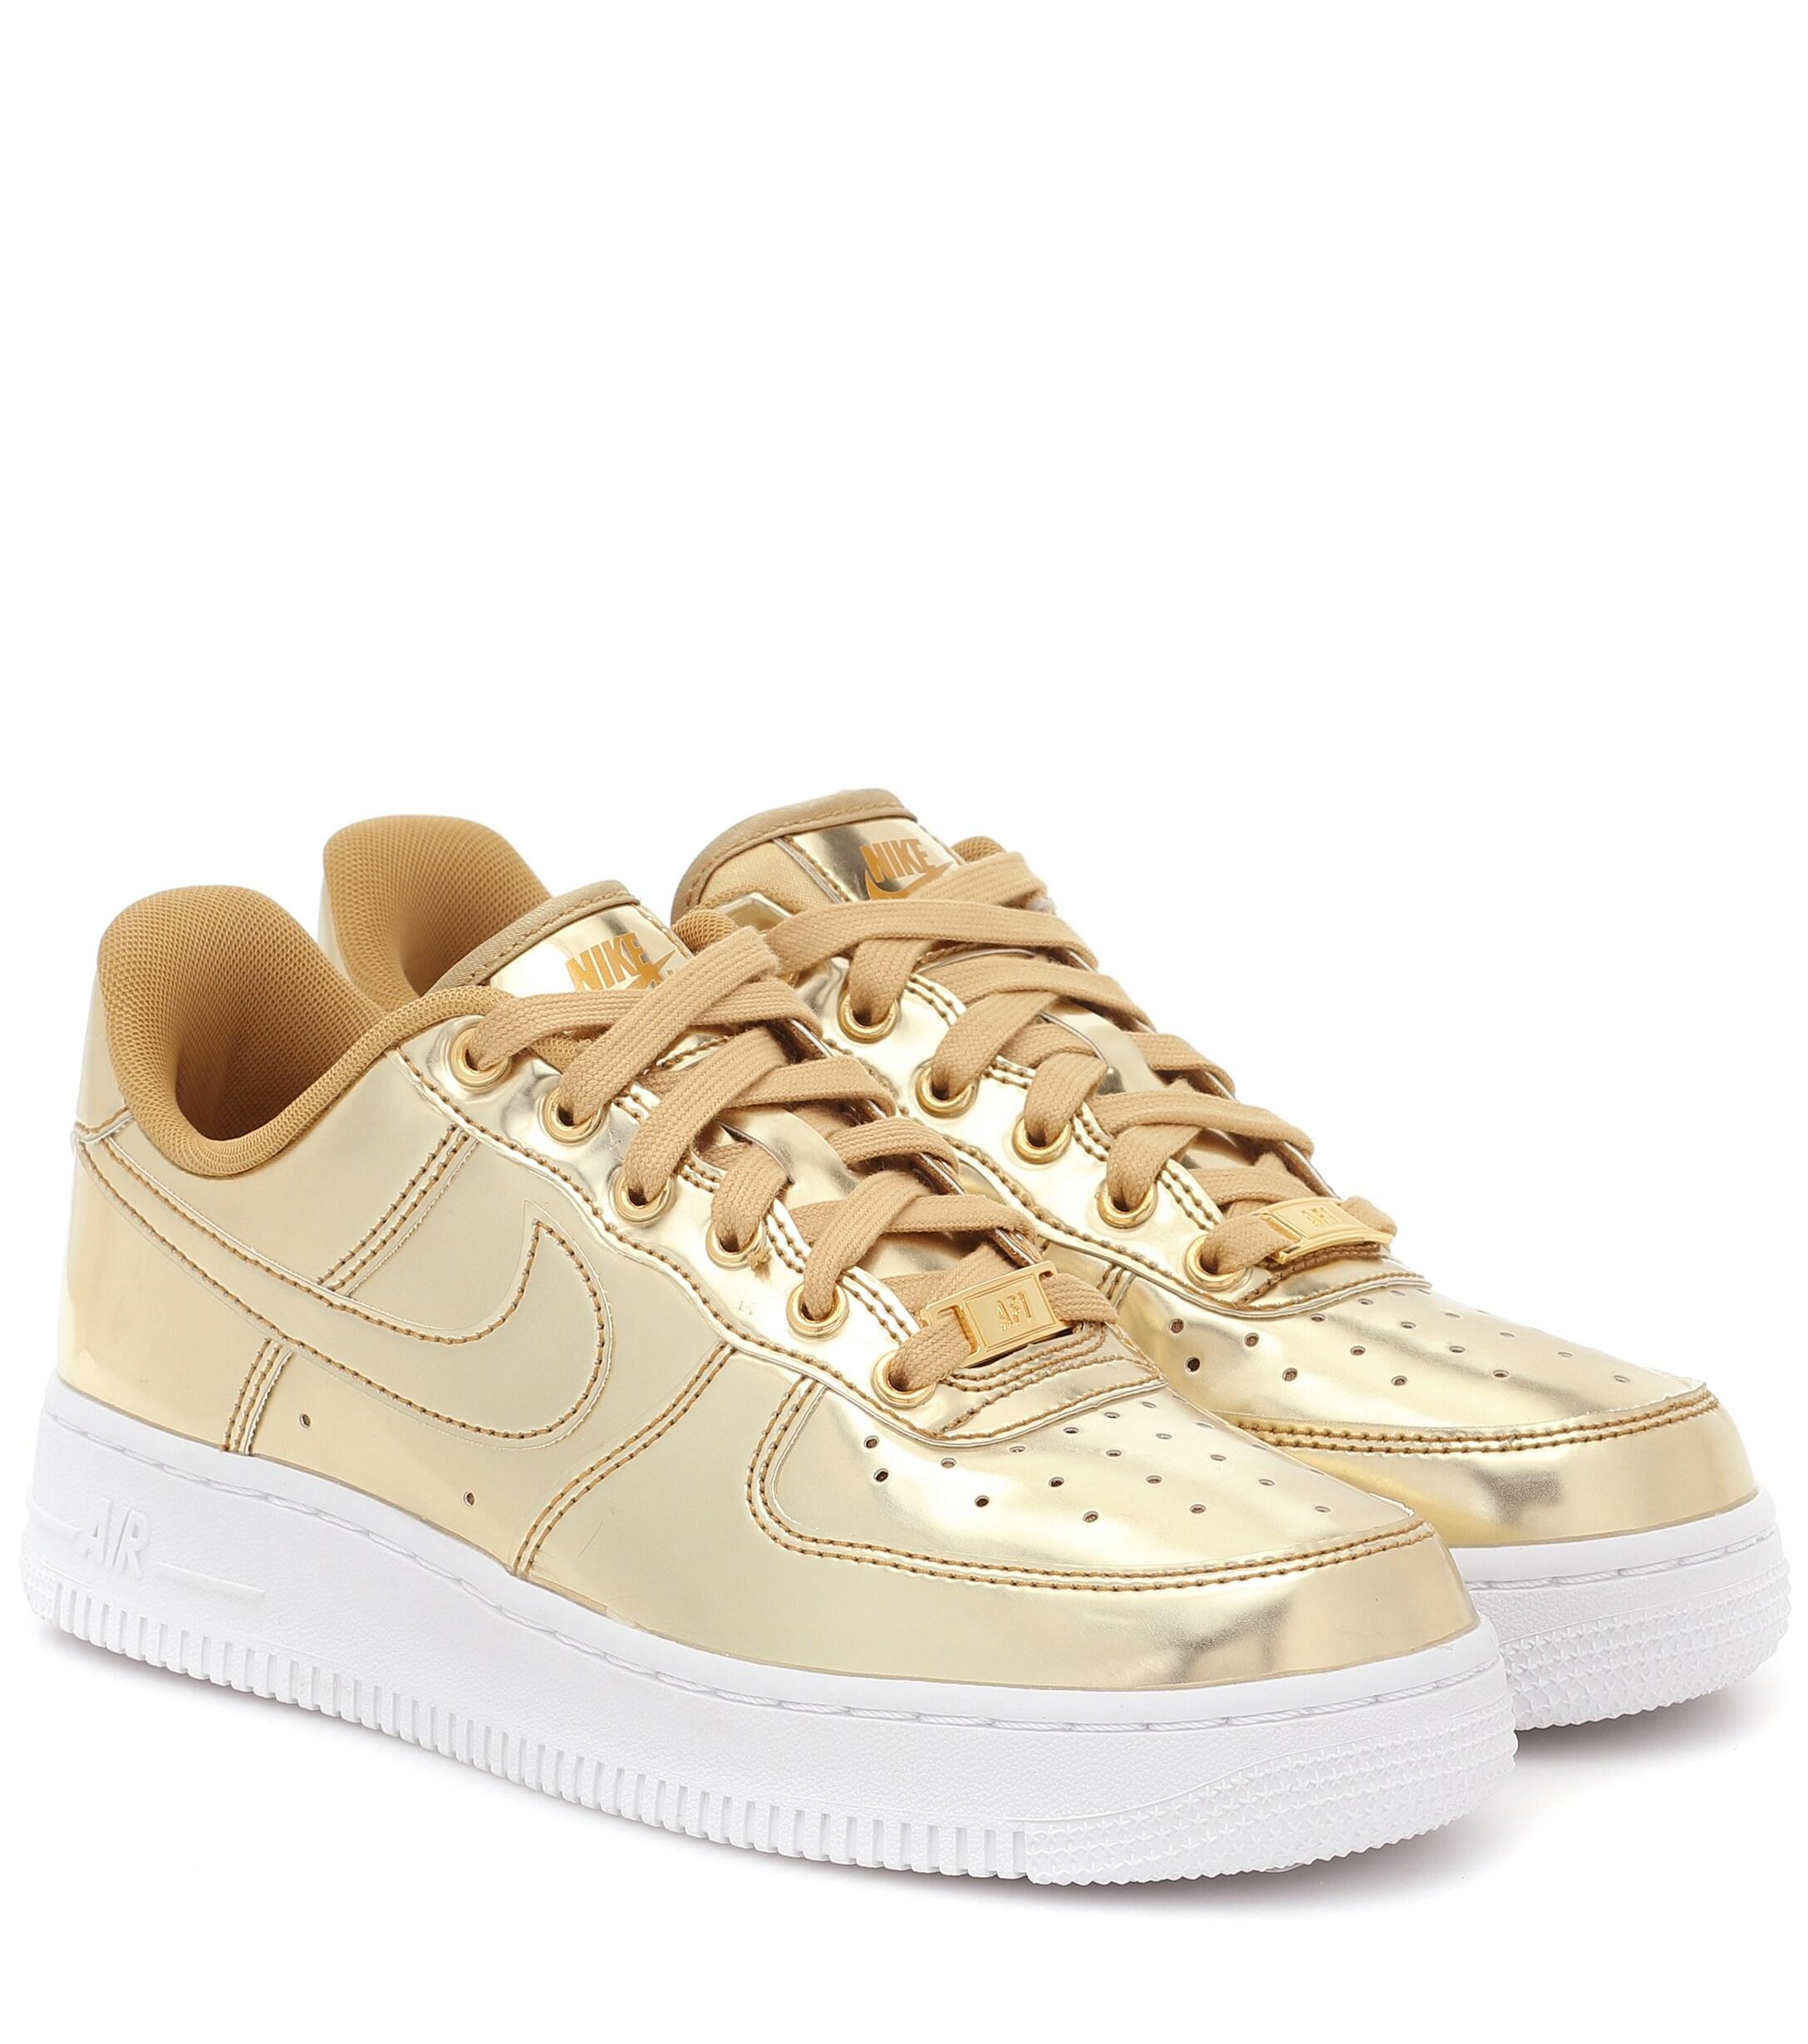 Nike Lace Air Force 1 Sp Sneakers in Gold (Metallic) - Save 84% | Lyst  Australia